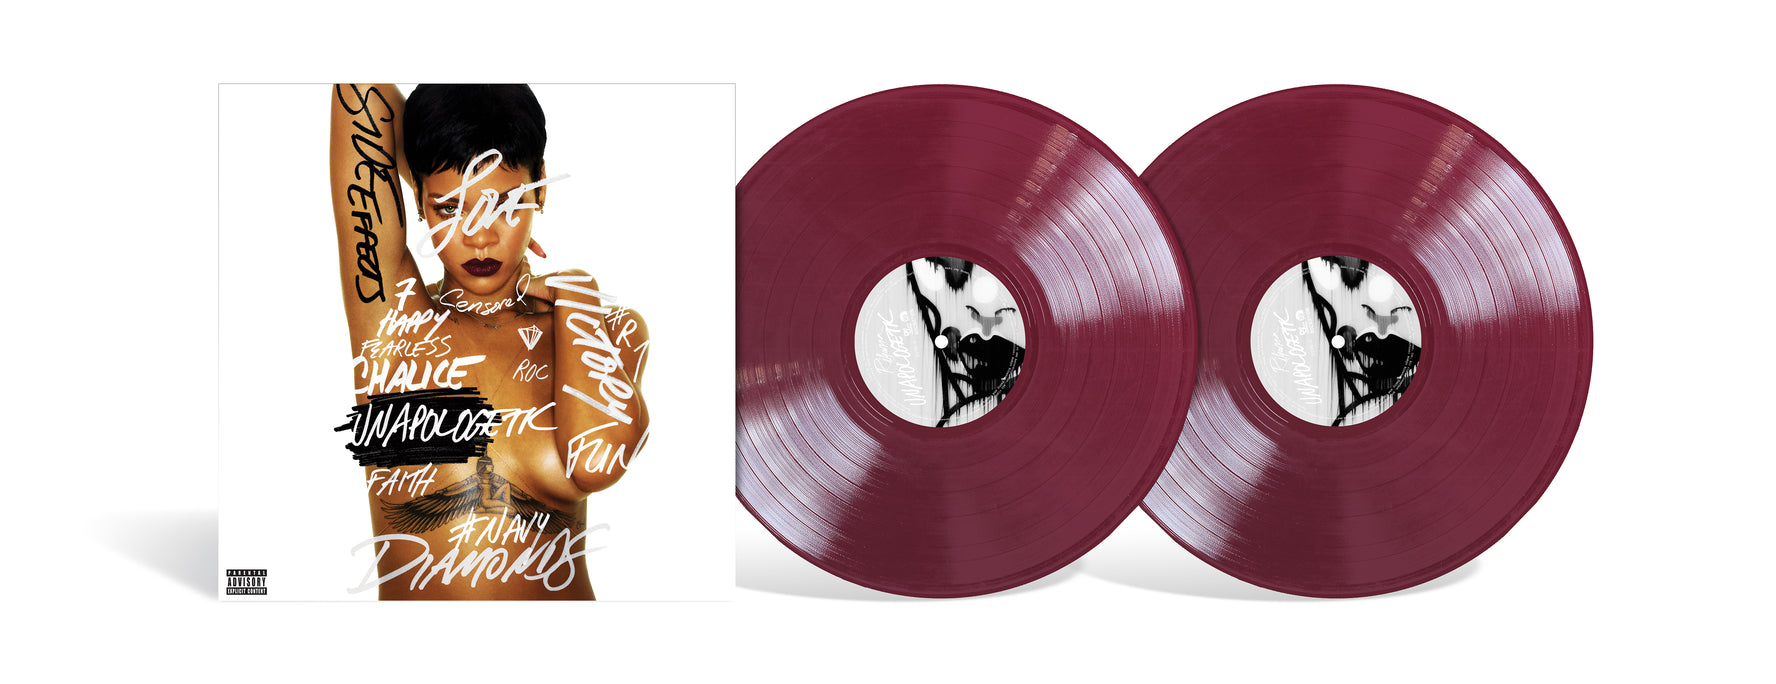 Unapologetic (Store Exclusive Limited Fruit Punch 2LP)